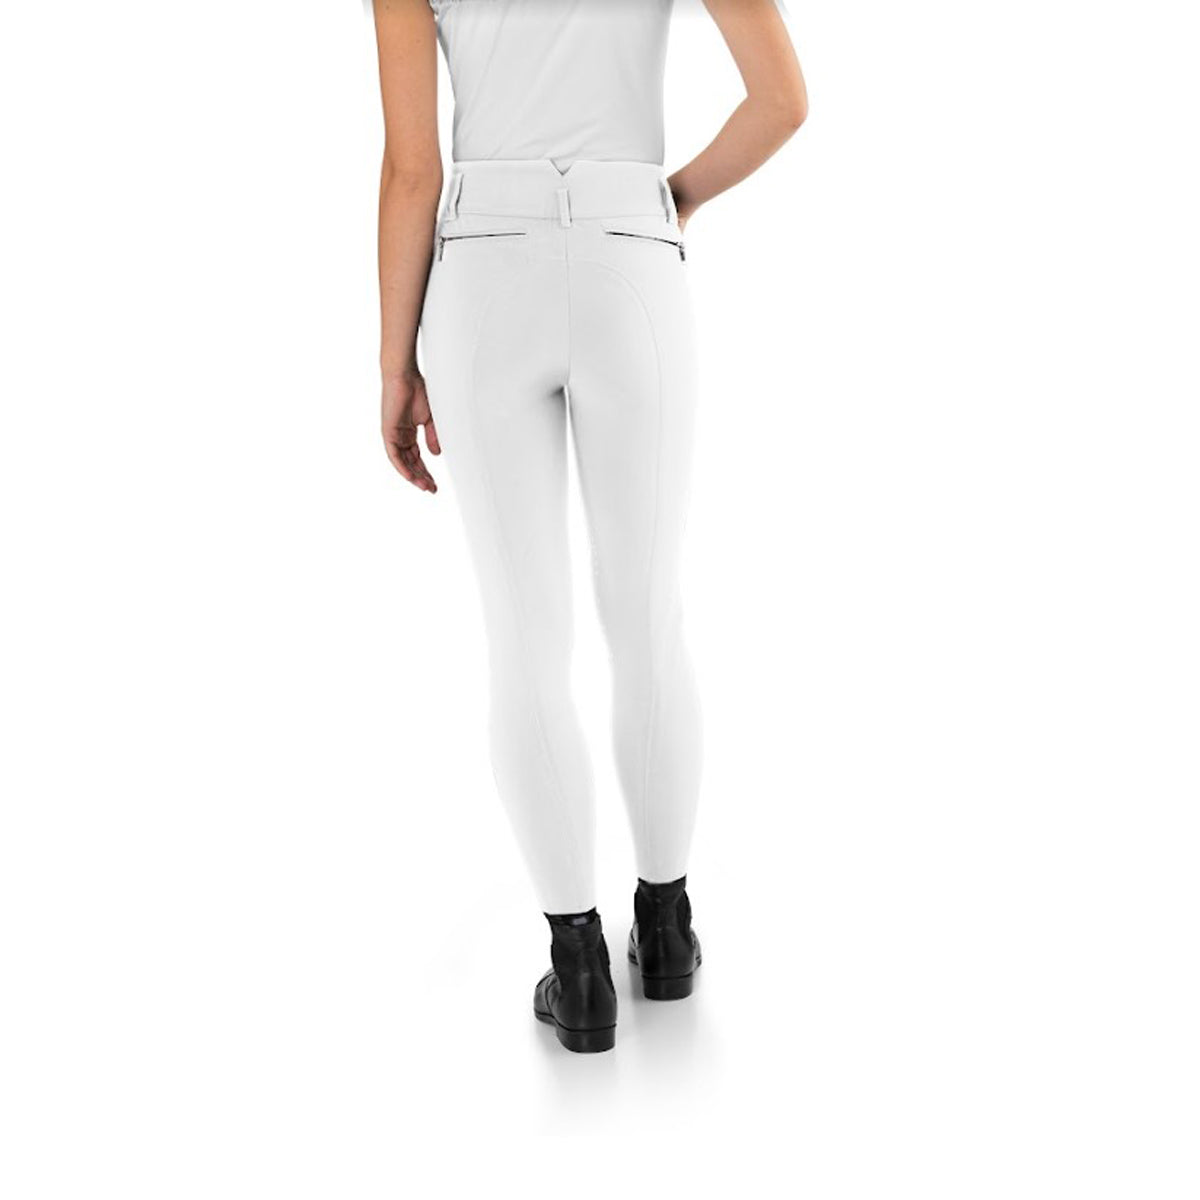 White Breeches Color The Rainbow Collection - EverythingEQ